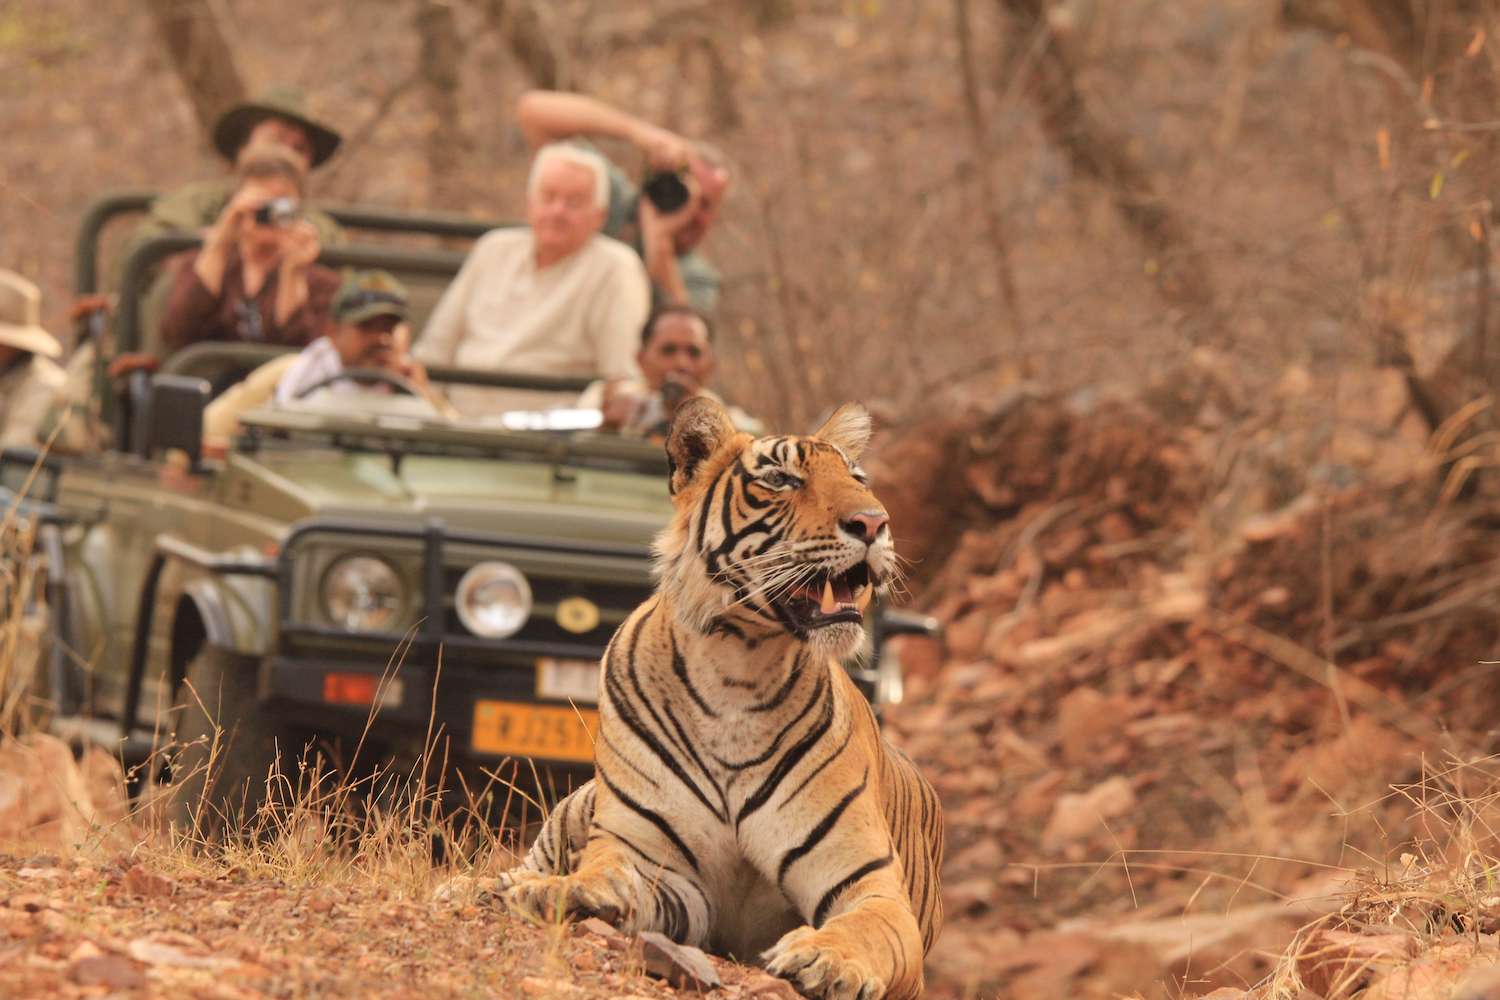 Nat Hab travelers photograph a tiger in India. 